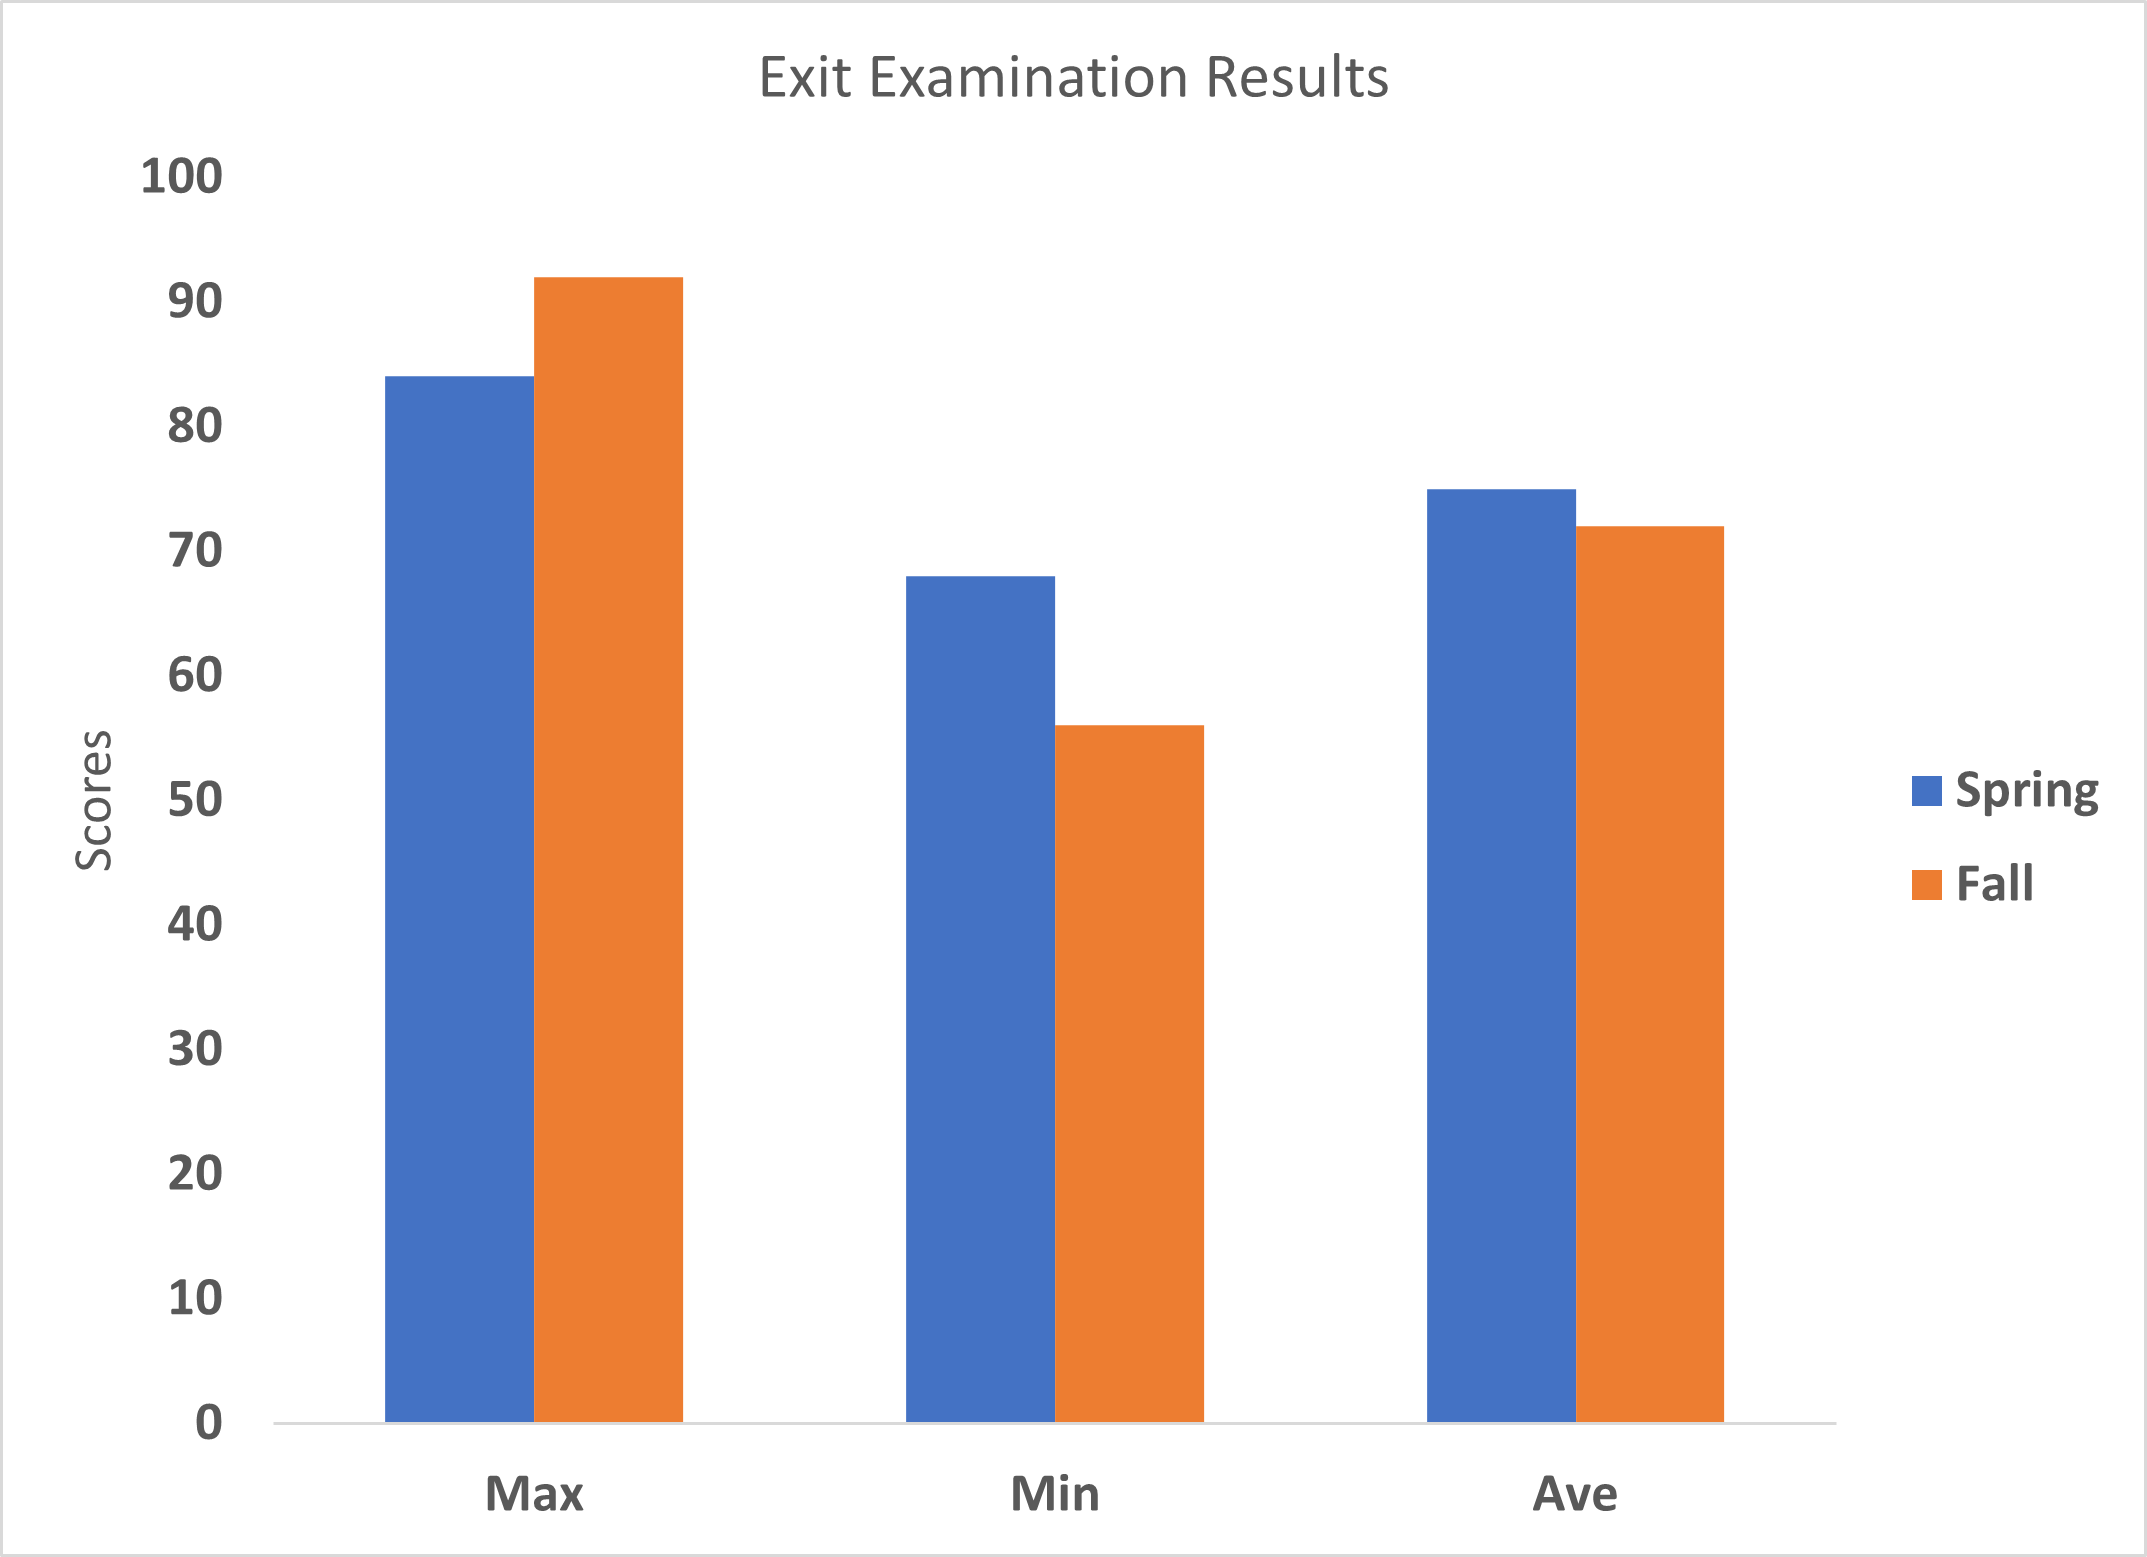 Exit results